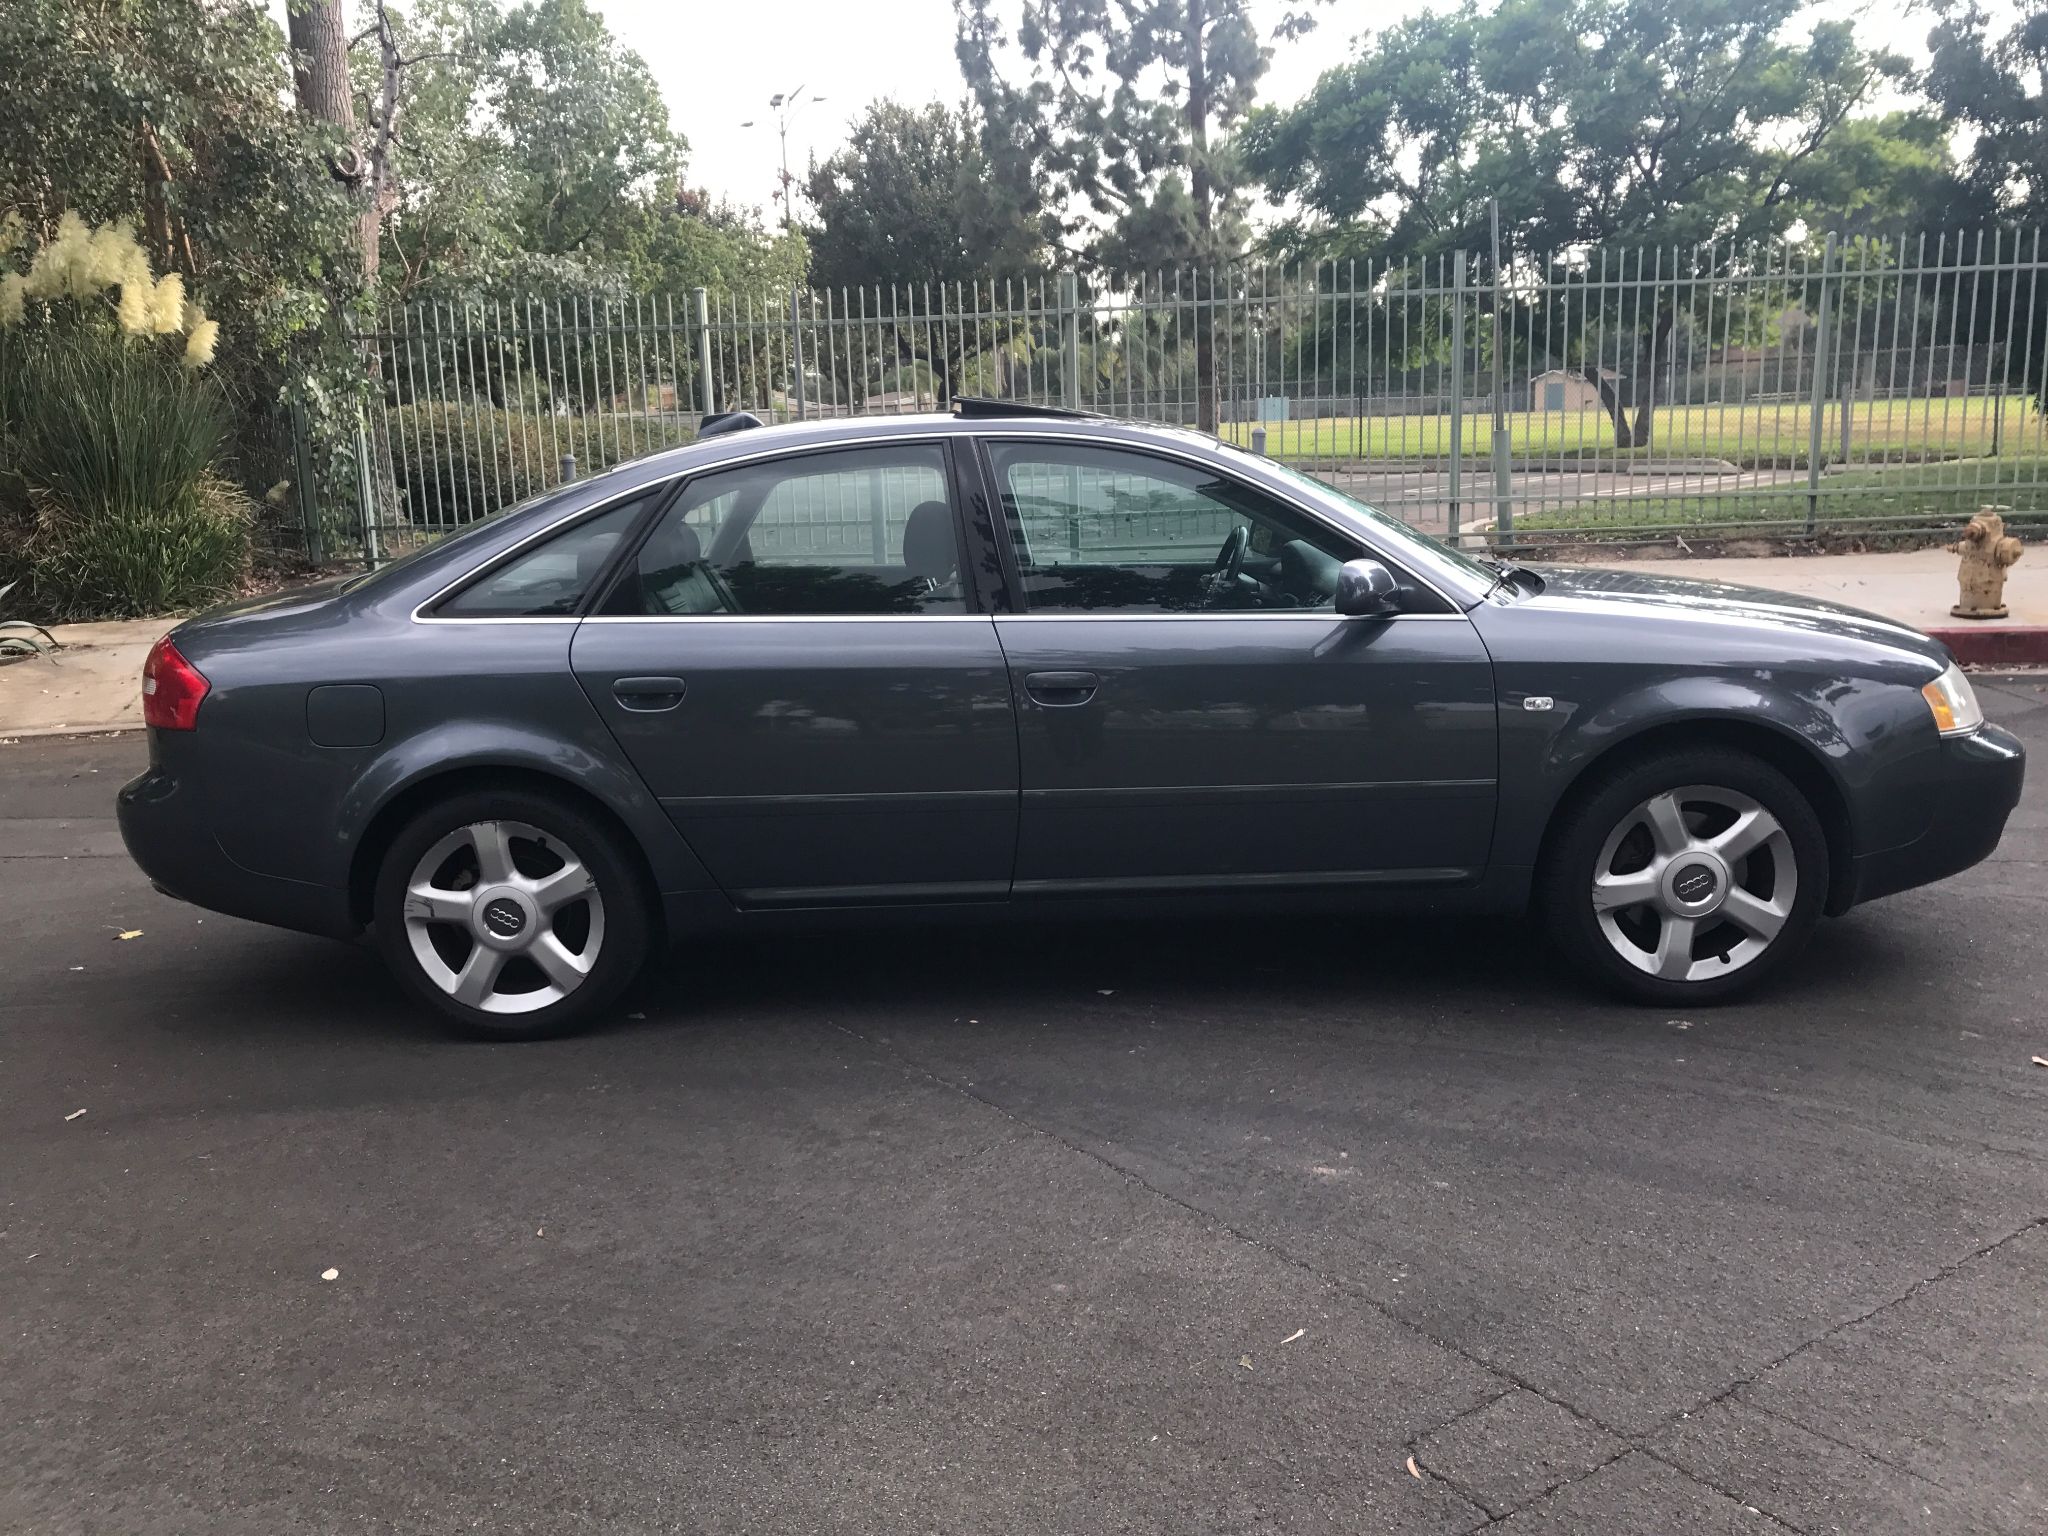 Used 2004 Audi A6 Quattro at City Cars Warehouse INC